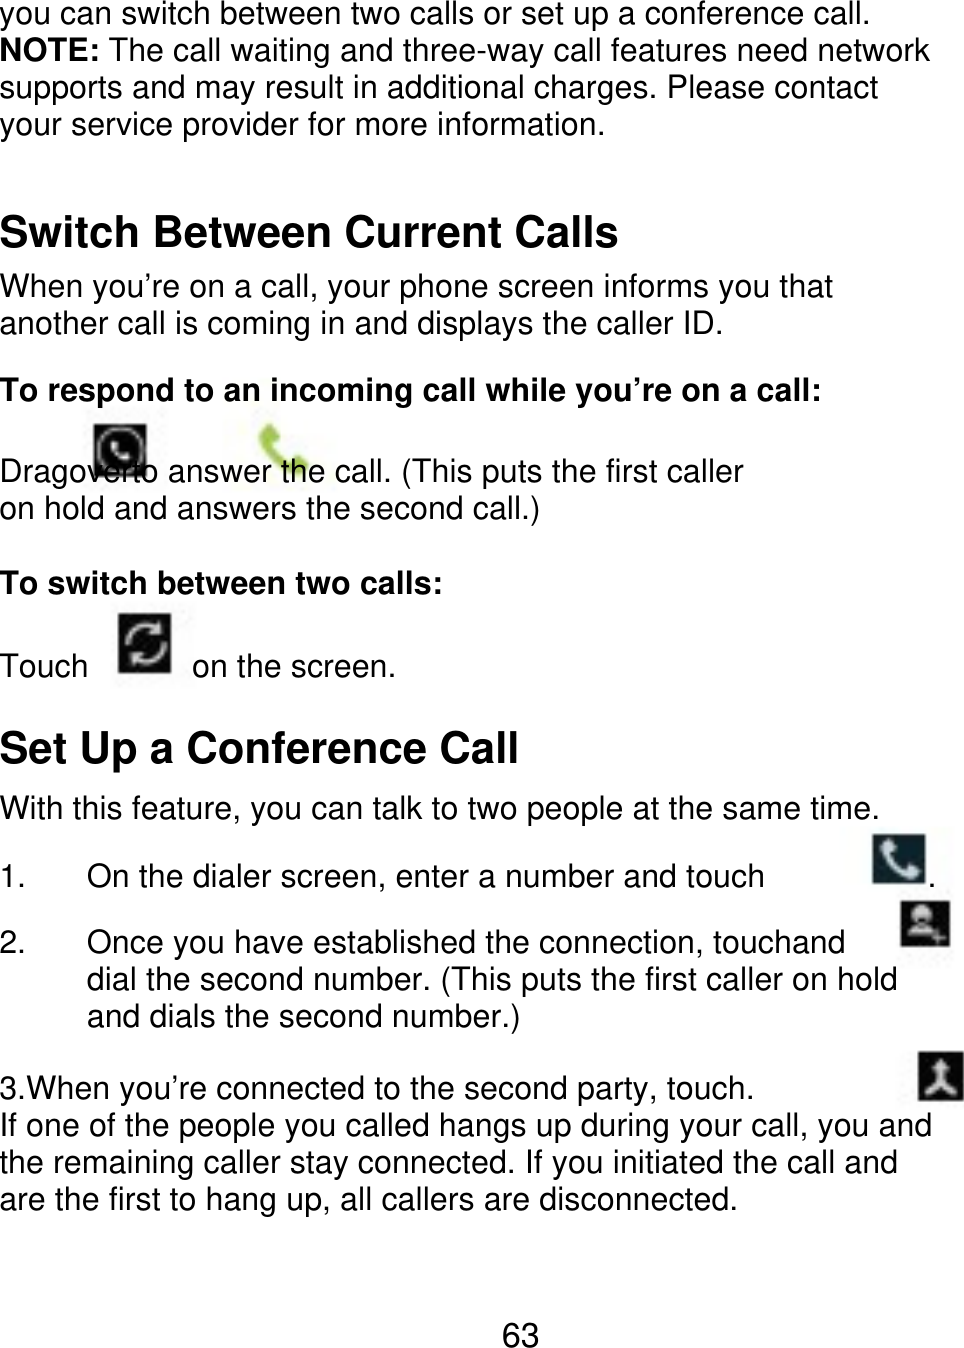 you can switch between two calls or set up a conference call. NOTE: The call waiting and three-way call features need network supports and may result in additional charges. Please contact your service provider for more information. Switch Between Current Calls When you’re on a call, your phone screen informs you that another call is coming in and displays the caller ID. To respond to an incoming call while you’re on a call: Dragoverto answer the call. (This puts the first caller on hold and answers the second call.) To switch between two calls: Touch on the screen. Set Up a Conference Call With this feature, you can talk to two people at the same time. 1. 2. On the dialer screen, enter a number and touch . Once you have established the connection, touchand dial the second number. (This puts the first caller on hold and dials the second number.) 3.When you’re connected to the second party, touch. If one of the people you called hangs up during your call, you and the remaining caller stay connected. If you initiated the call and are the first to hang up, all callers are disconnected. 63 